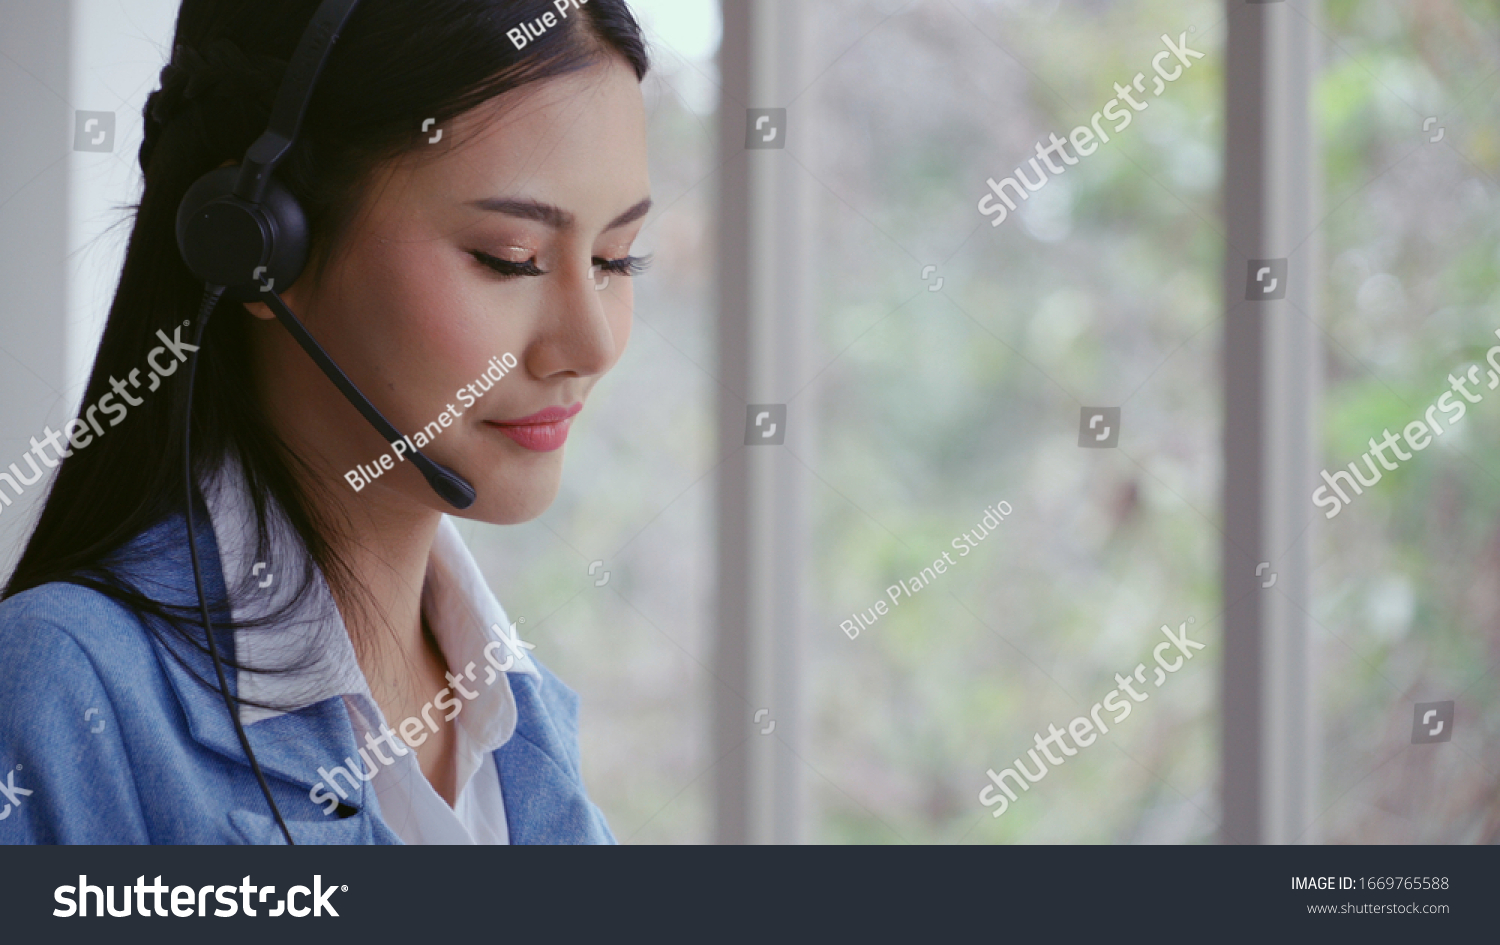 Customer support agent or call center with headset works on desktop computer while supporting the customer on phone call. Operator service business representative concept. #1669765588